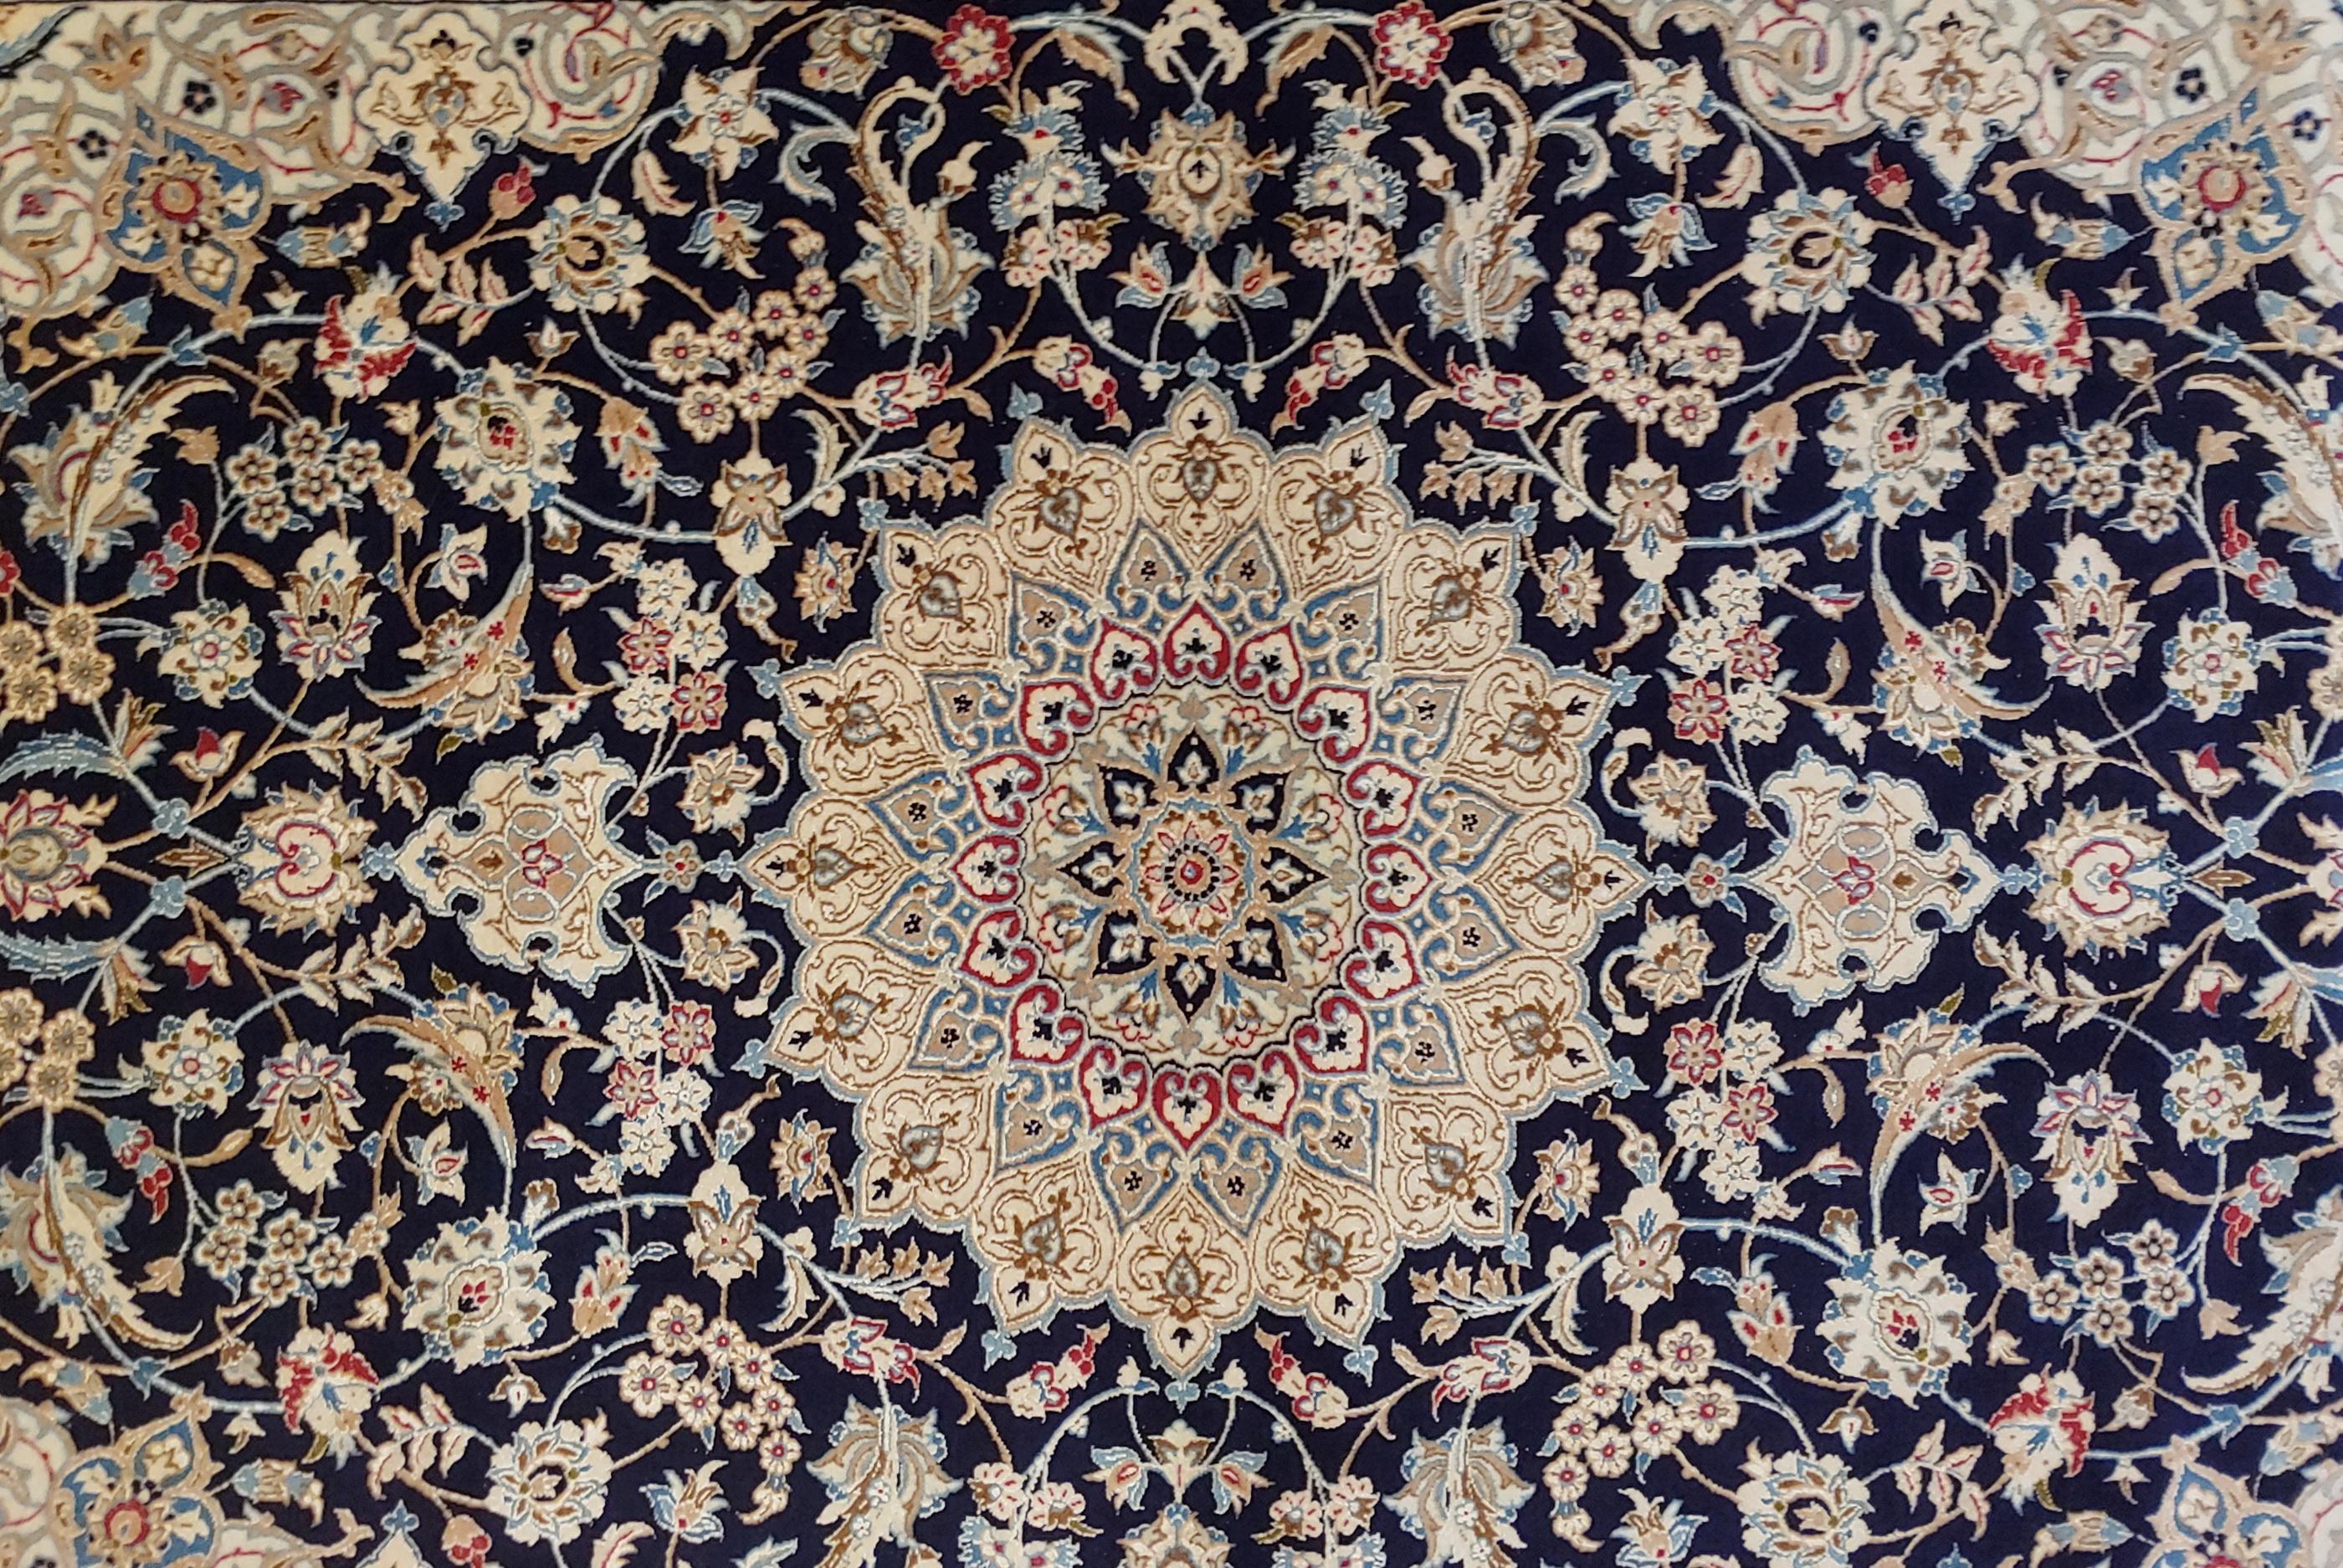 Extraordinary and very fine Persian Nain rug. It is a wool pile with silk highlights woven on linen. It uses the traditional Nain colors of blues and taupe with a medallion design, circa 1970. Measures: 4 x 6-4.